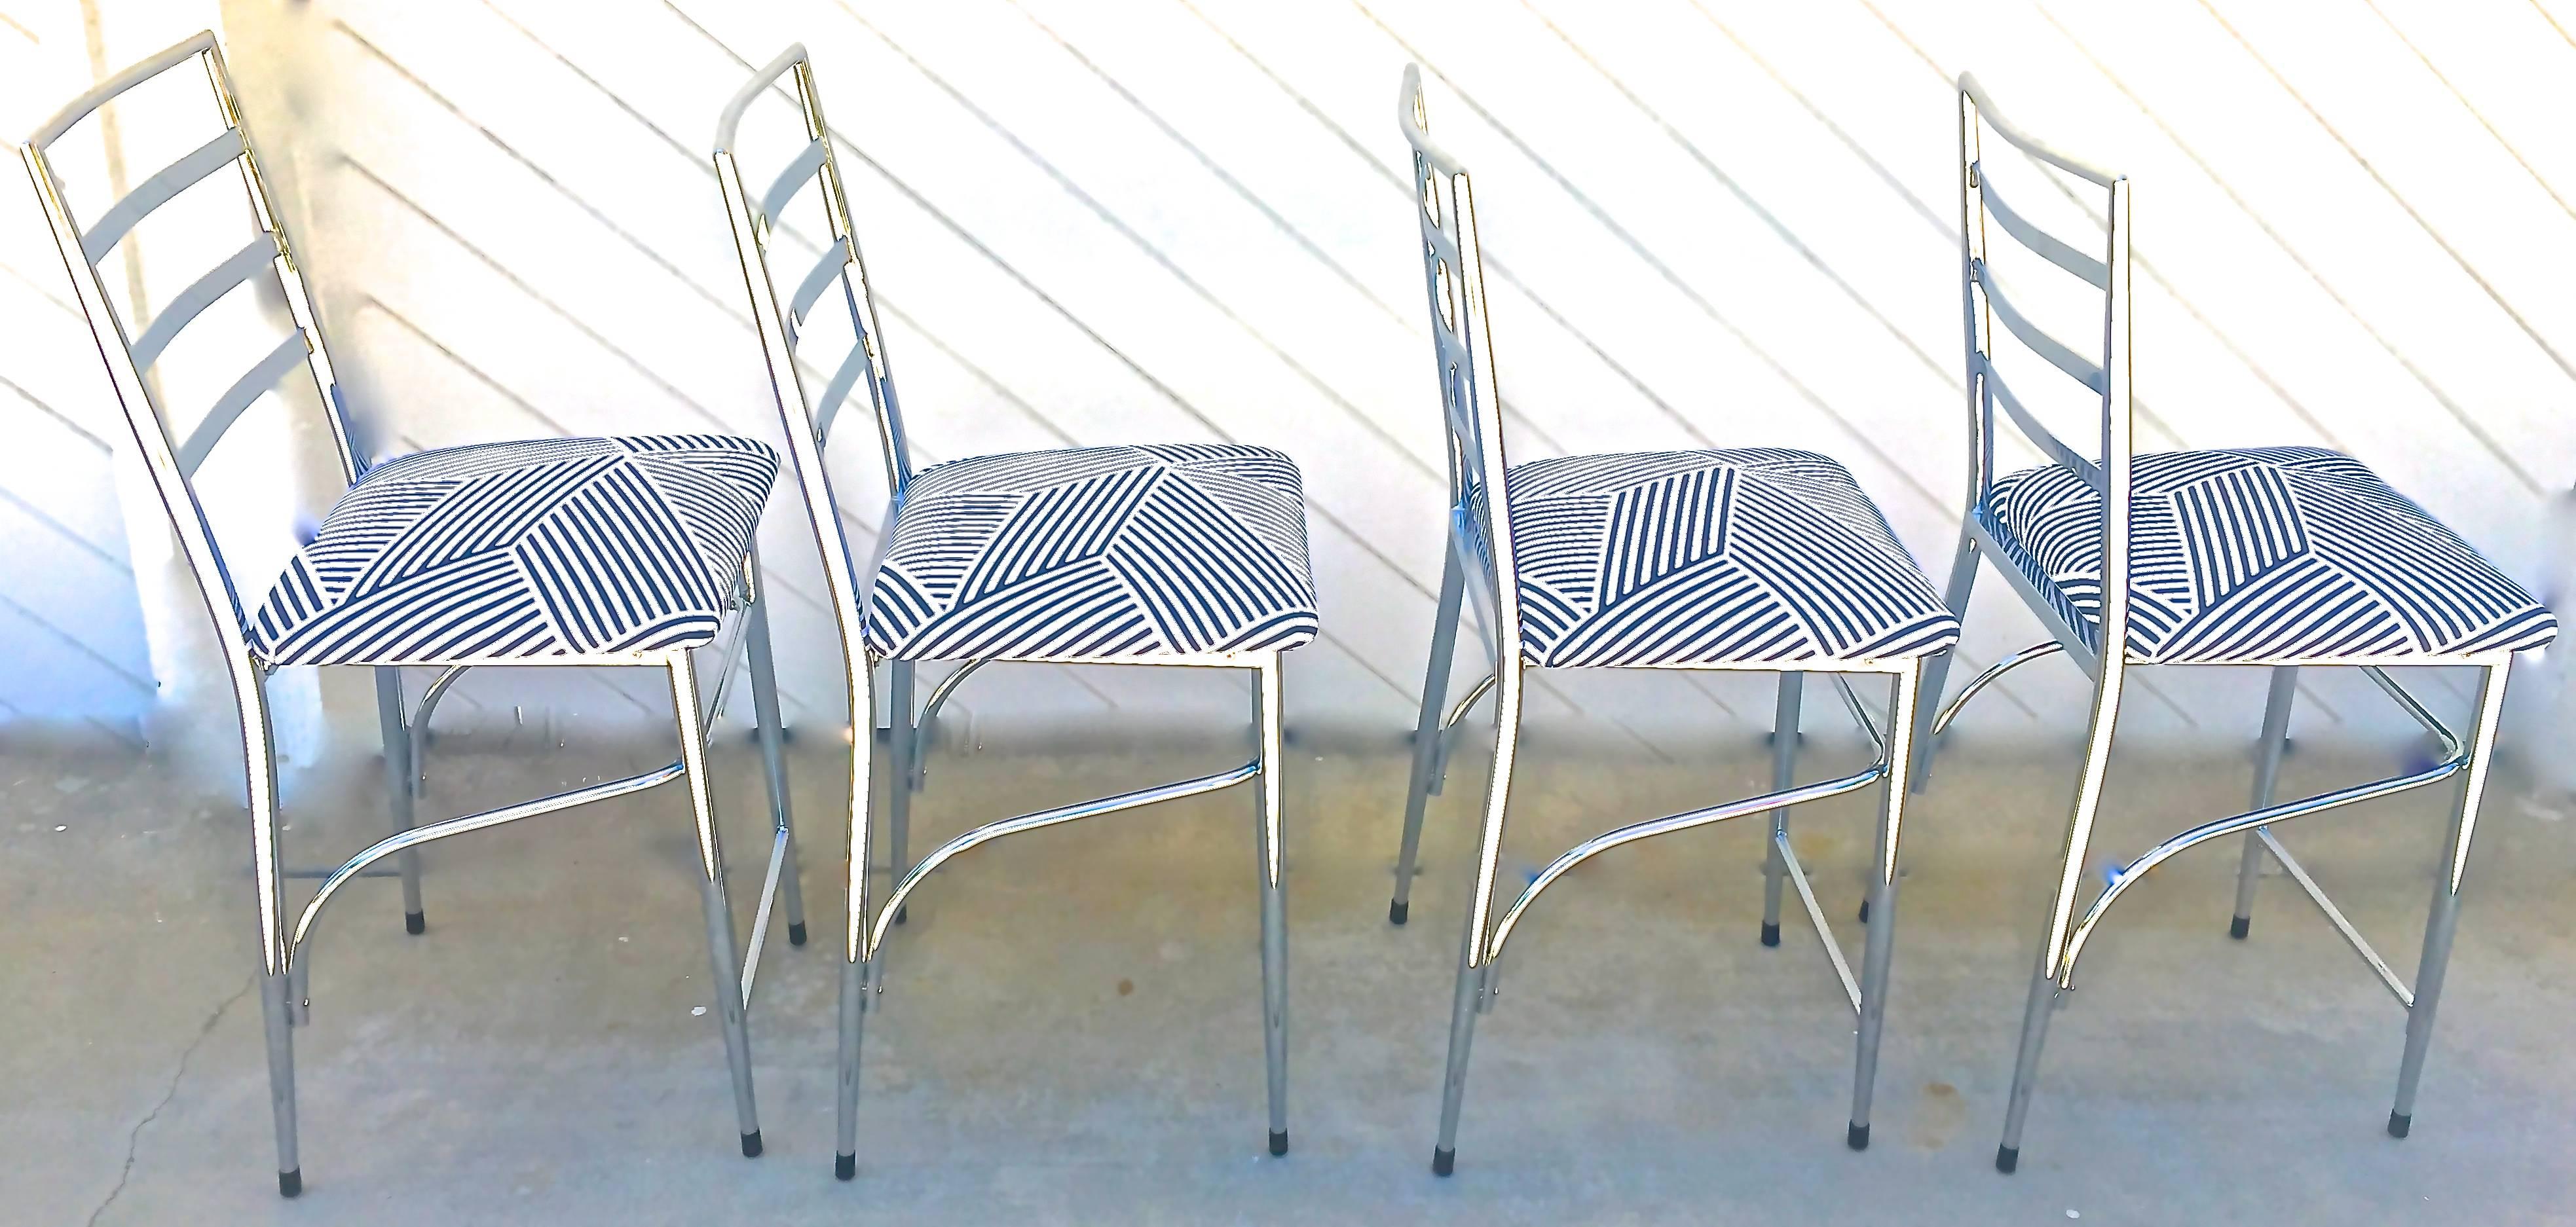 Very much in the manner of Gio Ponti's Superleggera chrome chairs, these clean-lined, minimal bar stools are the perfect antidote to other more clumsy, hard-to-manage bar and counter seating. Incredibly light weight the graceful ladder back and